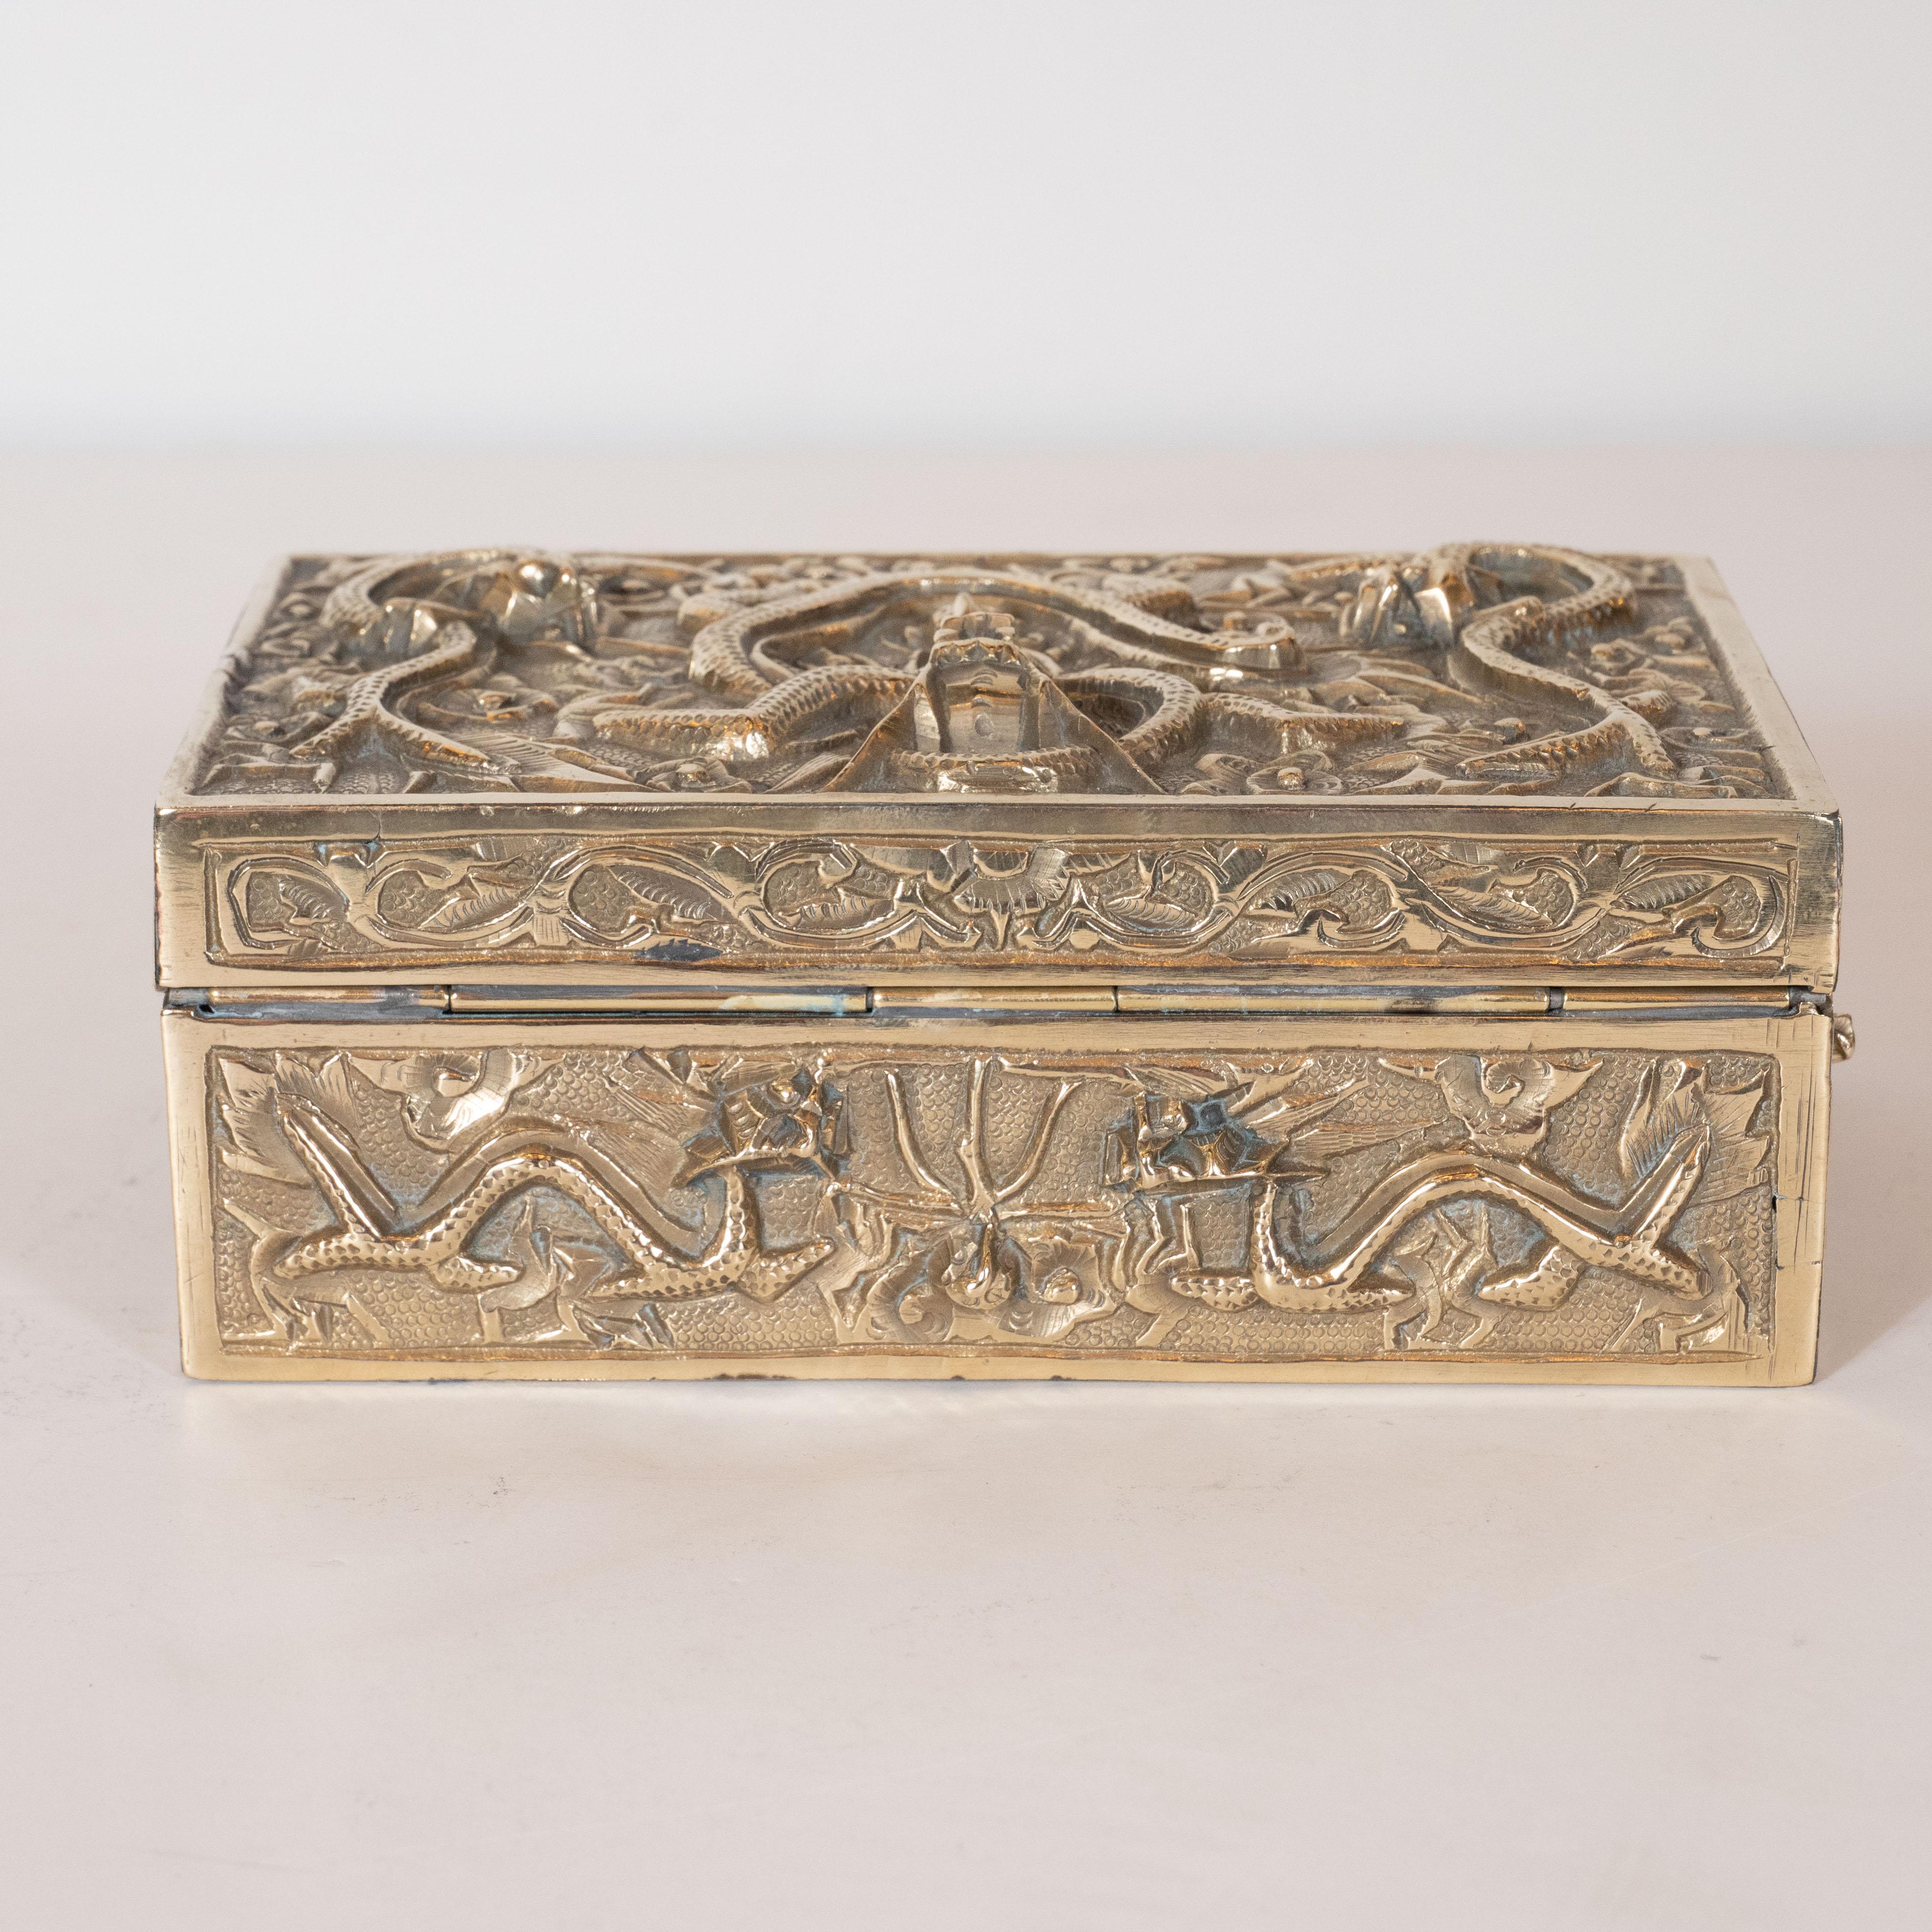 Art Deco Brass Rectangular Decorative Box with Dragon Motif in High Relief 5